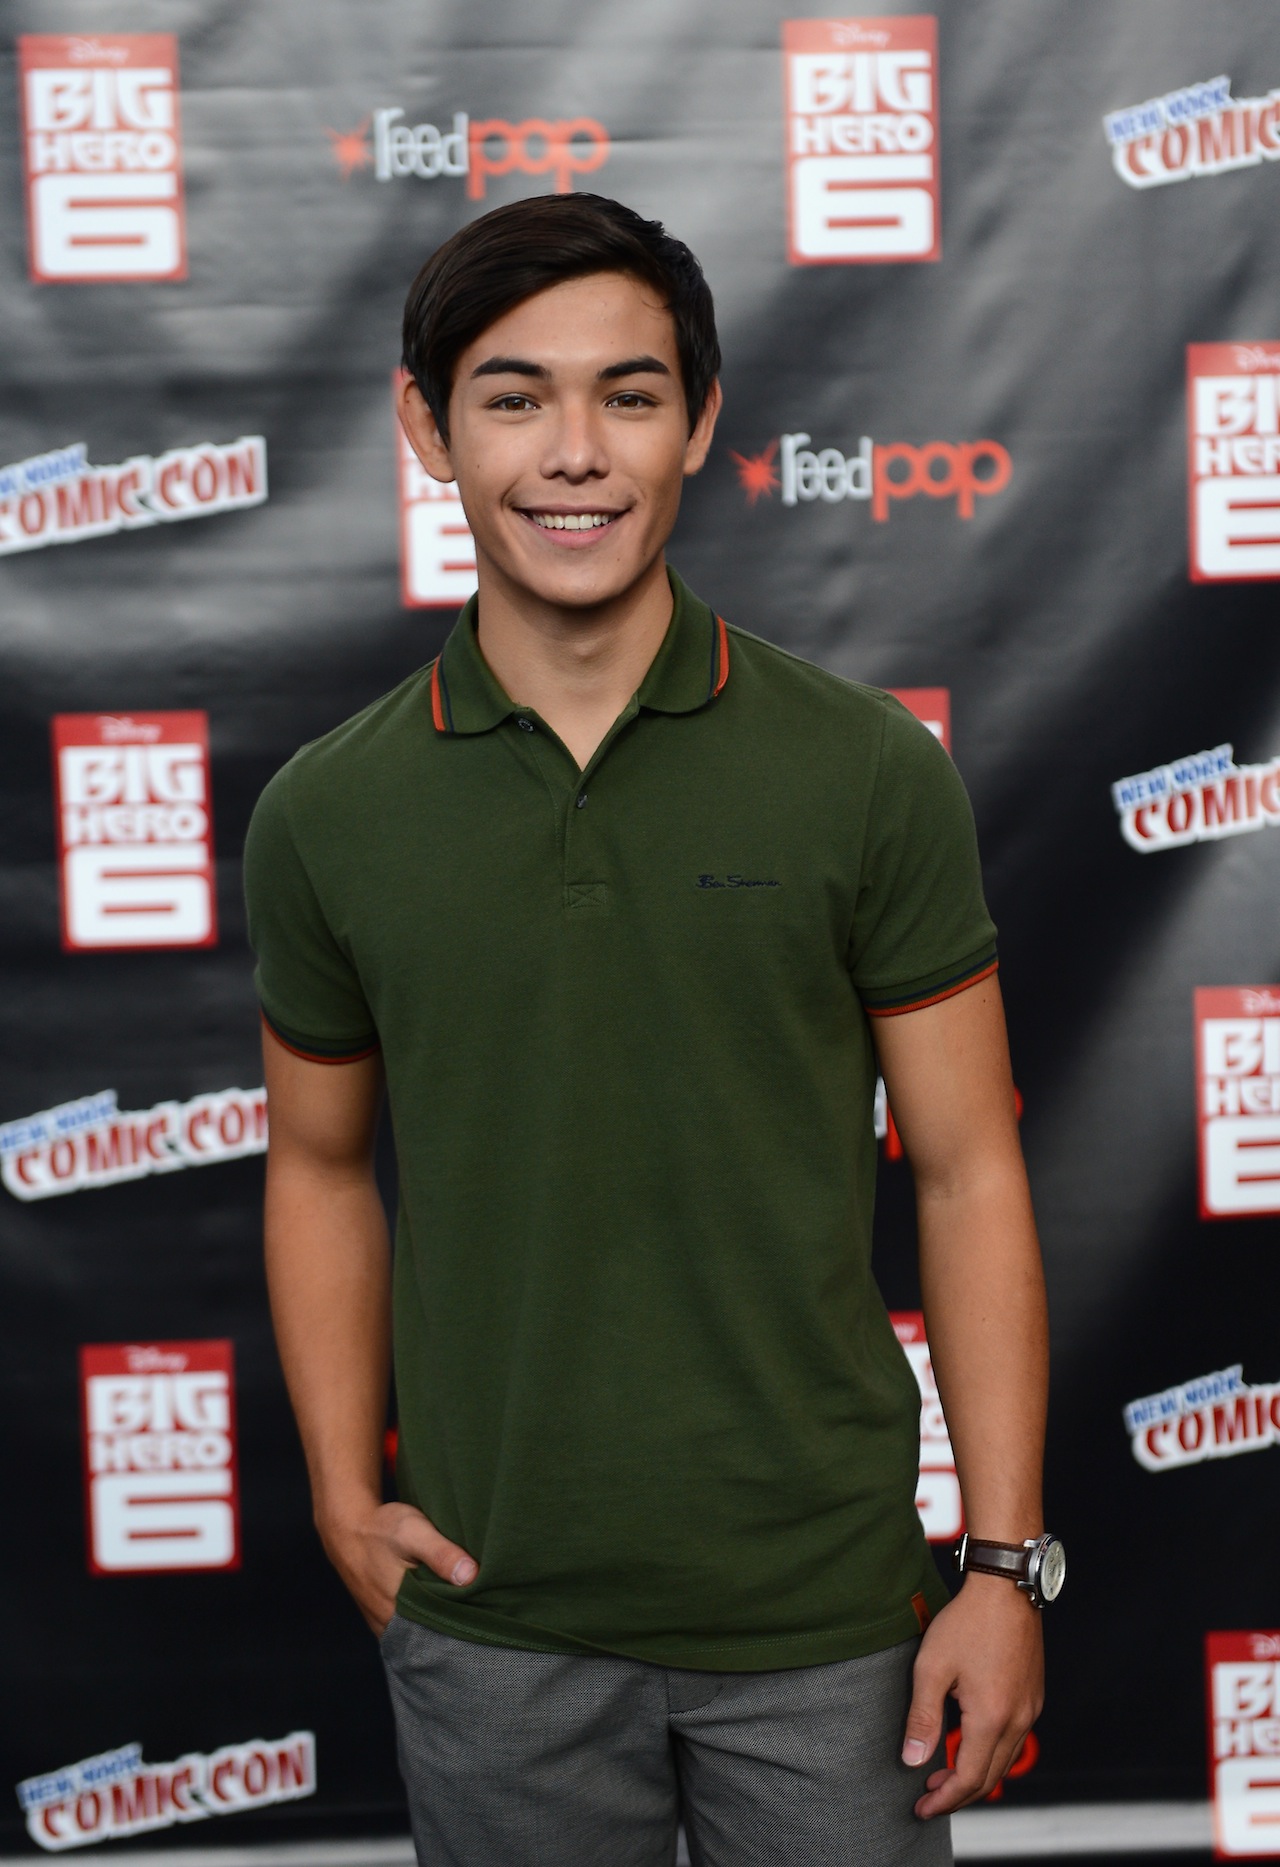 NEW YORK, NY - OCTOBER 09:  Actor Ryan Potter attends Walt Disney Studios' 2014 New York Comic Con presentations of "Big Hero 6" and "Tomorrowland" at the Javits Convention Center on Thursday October 9, 2014 in New York City.  (Photo by Stephen Lovekin/Getty Images for Disney) *** Local Caption *** Ryan Potter